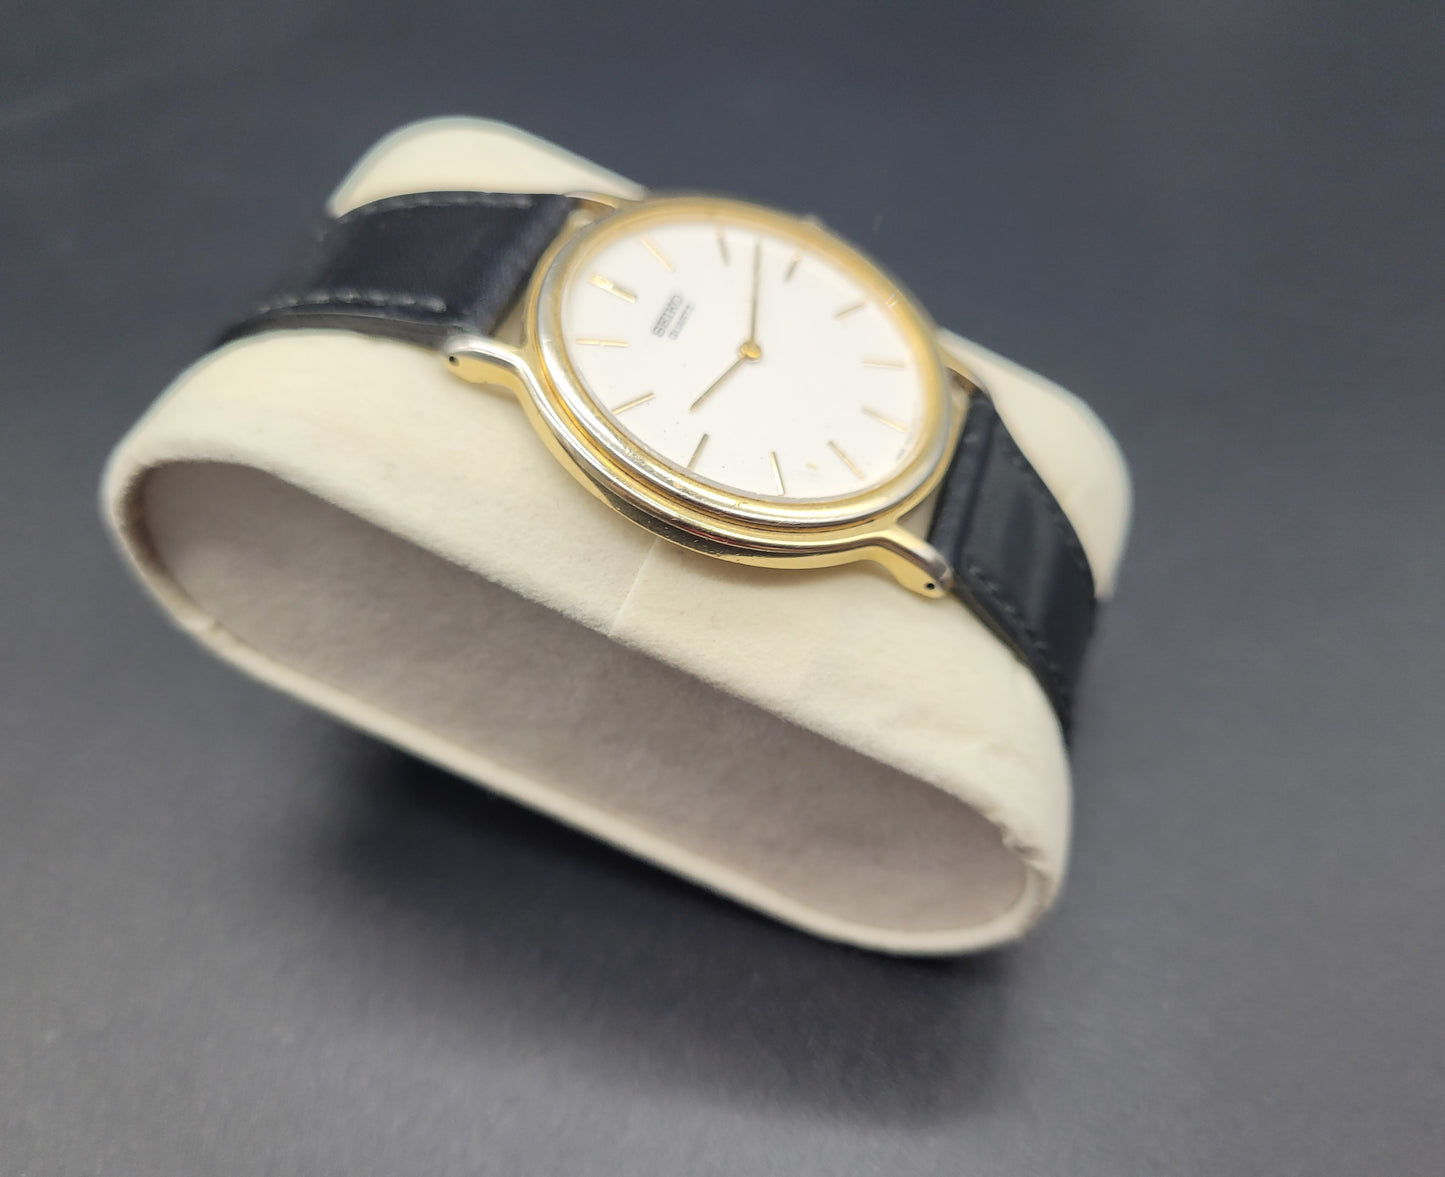 Vintage SEIKO Watches online Gold Plated White Dial